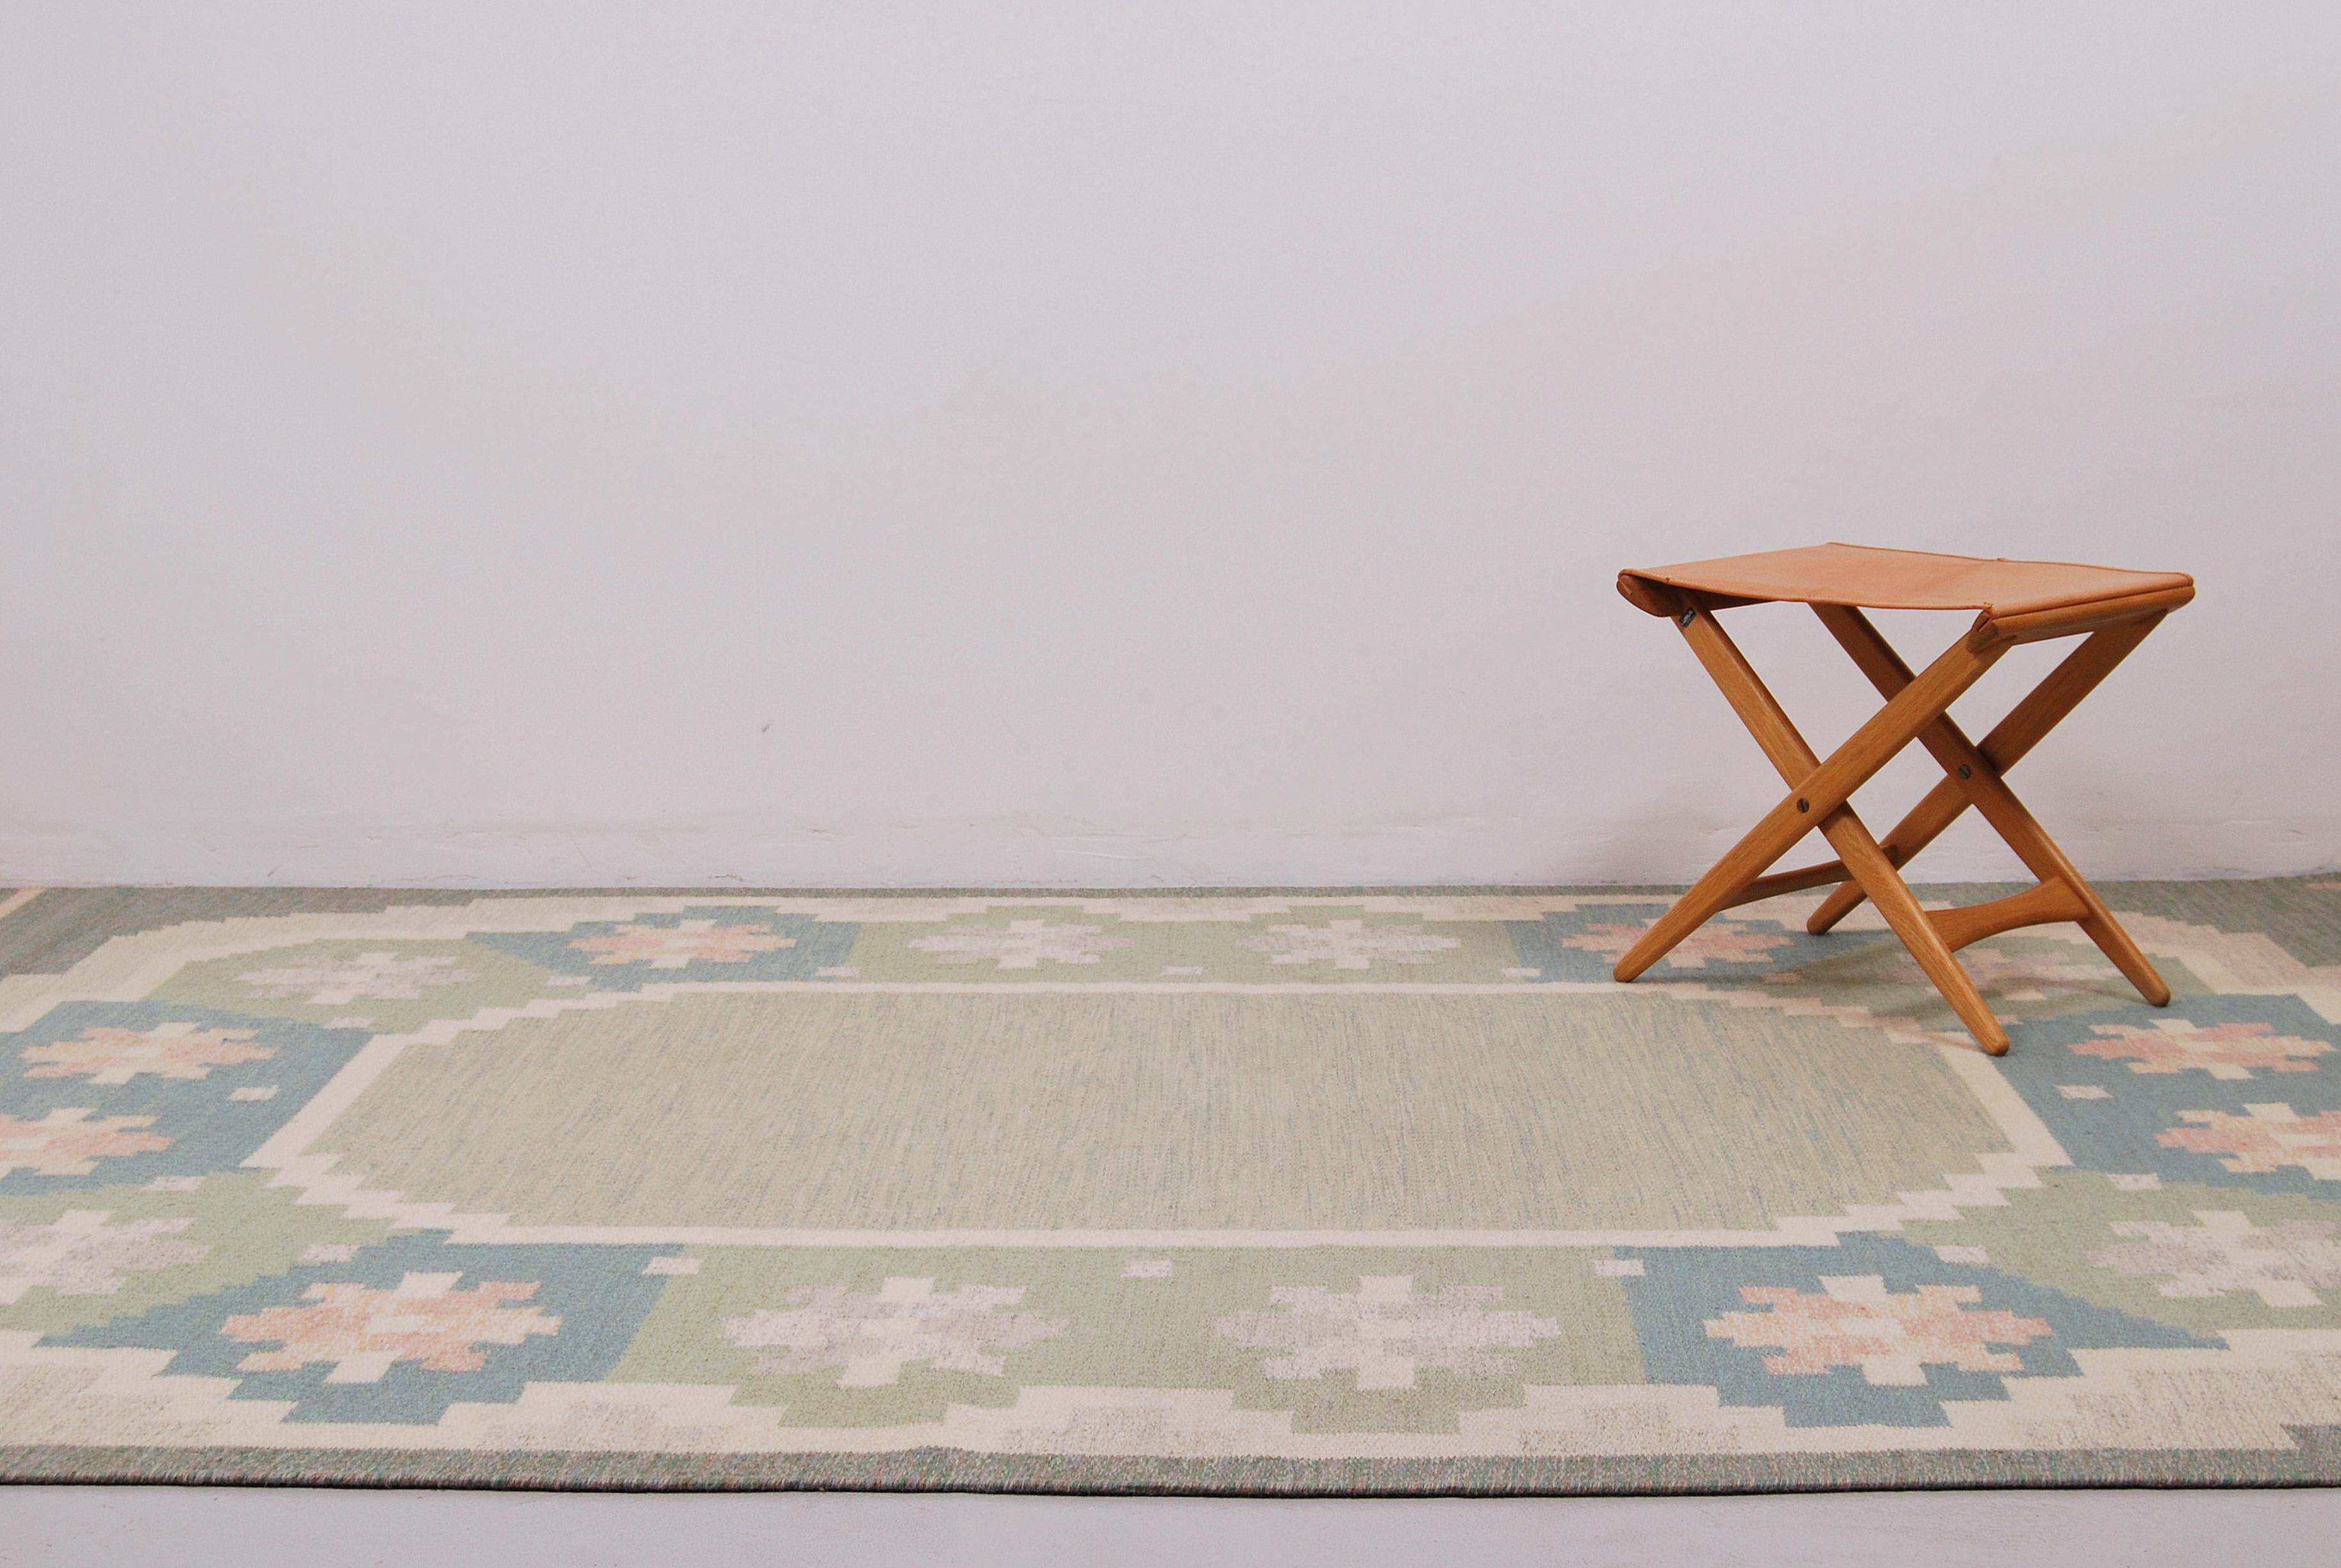 This large flat-weave Rölakan carpet was designed by Anna Johanna Ångström and made by hand in Sweden during the 1960s. It has fields in different shades of green, blue, white and pink and was woven in wool. Signed ”Å” to the right hand corner.